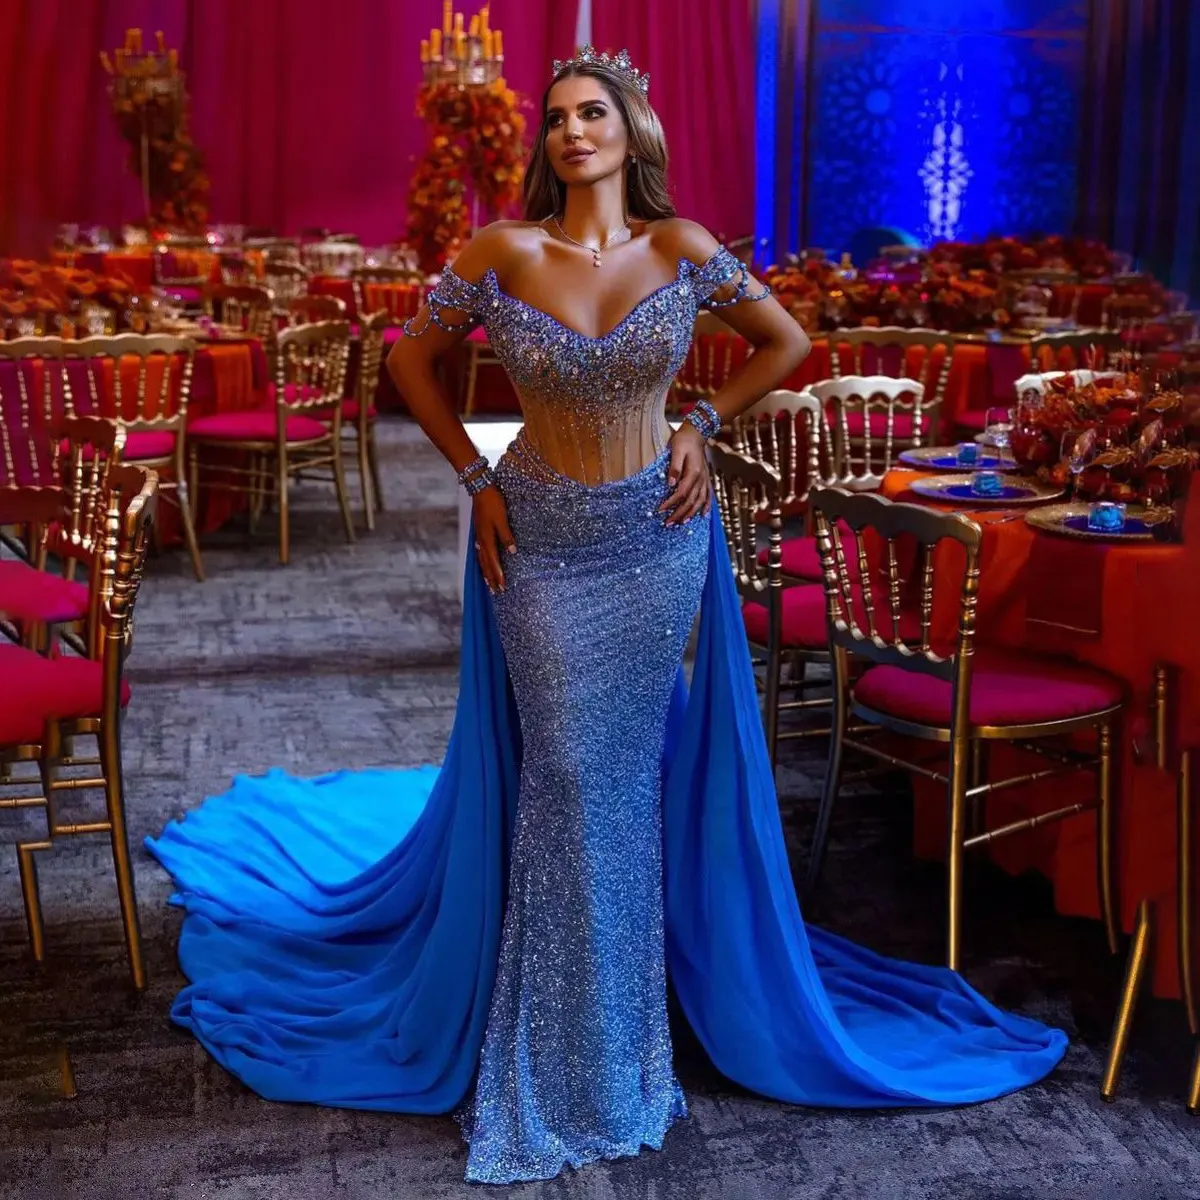 Fashion Sparkly Mermaid Evening Dress Sexy Blue Shine Beads Tunic Prom Diamonds Dresses Sweep Train Party Special Occasion Gowns Customized D-L23144